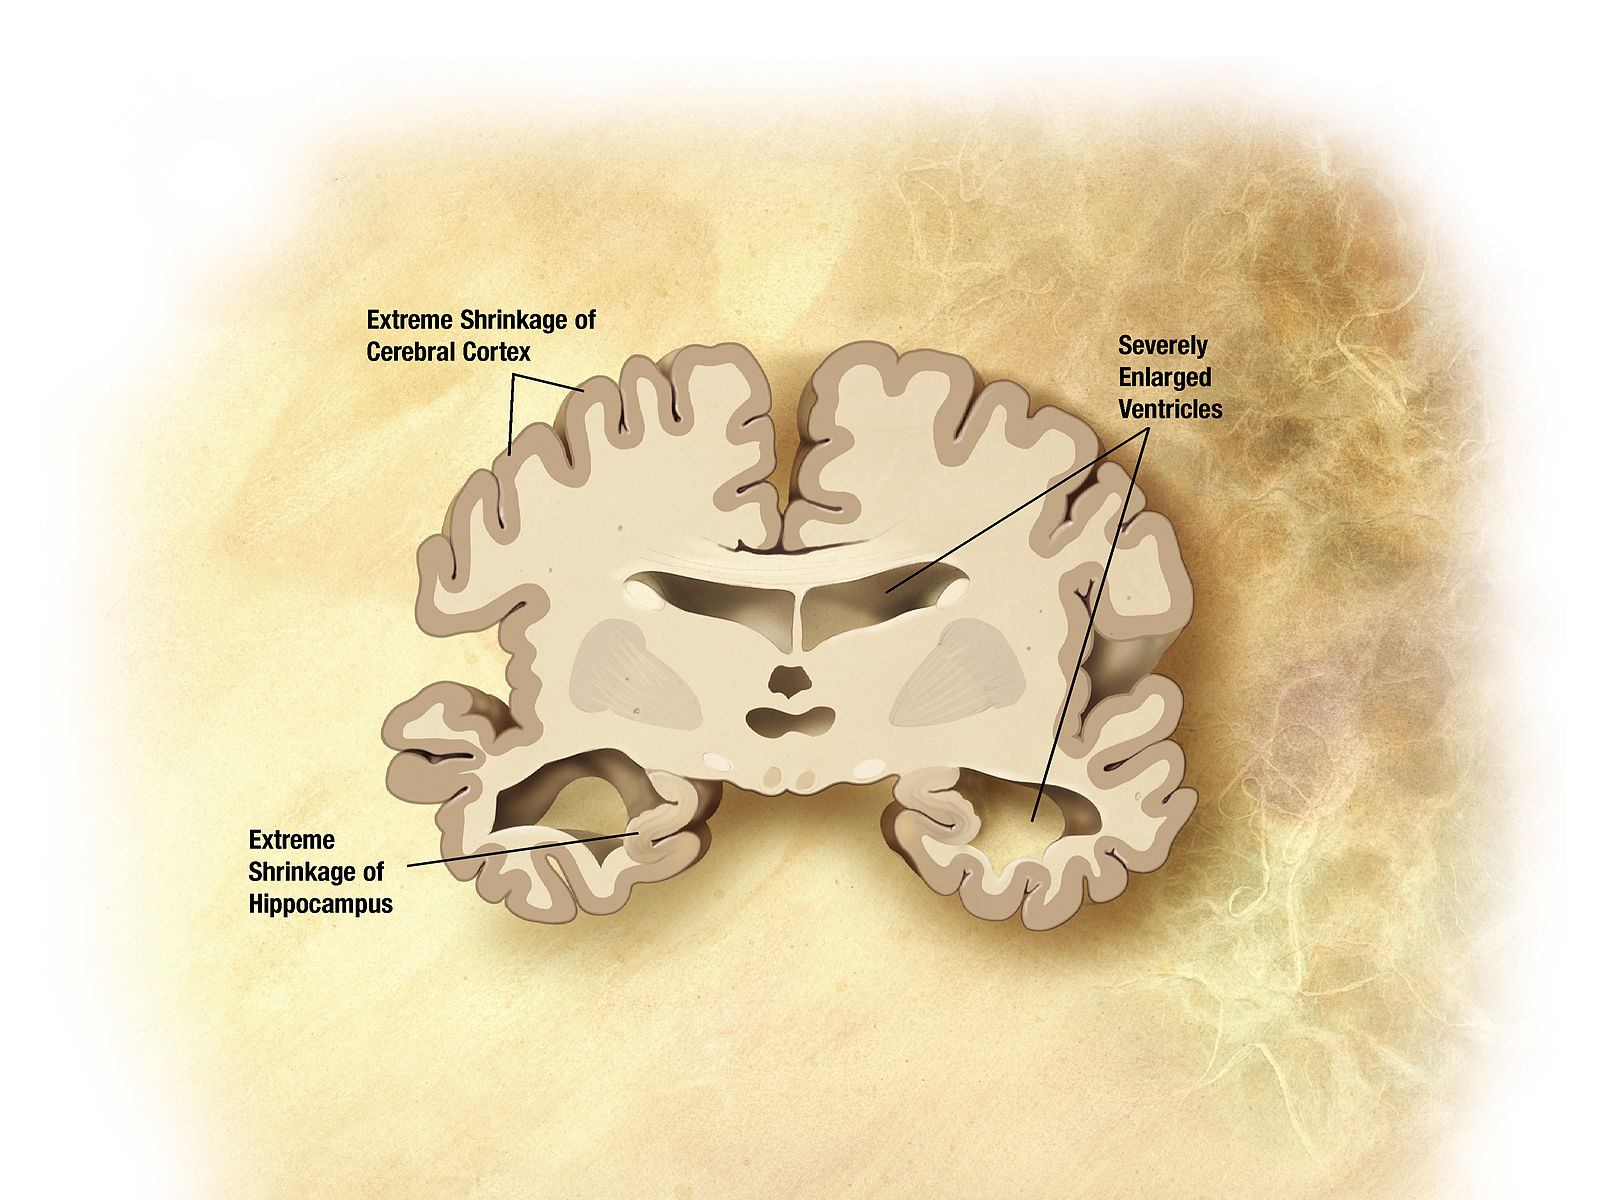 Difference Between Alzheimer's Disease and Dementia with Lewy Bodies